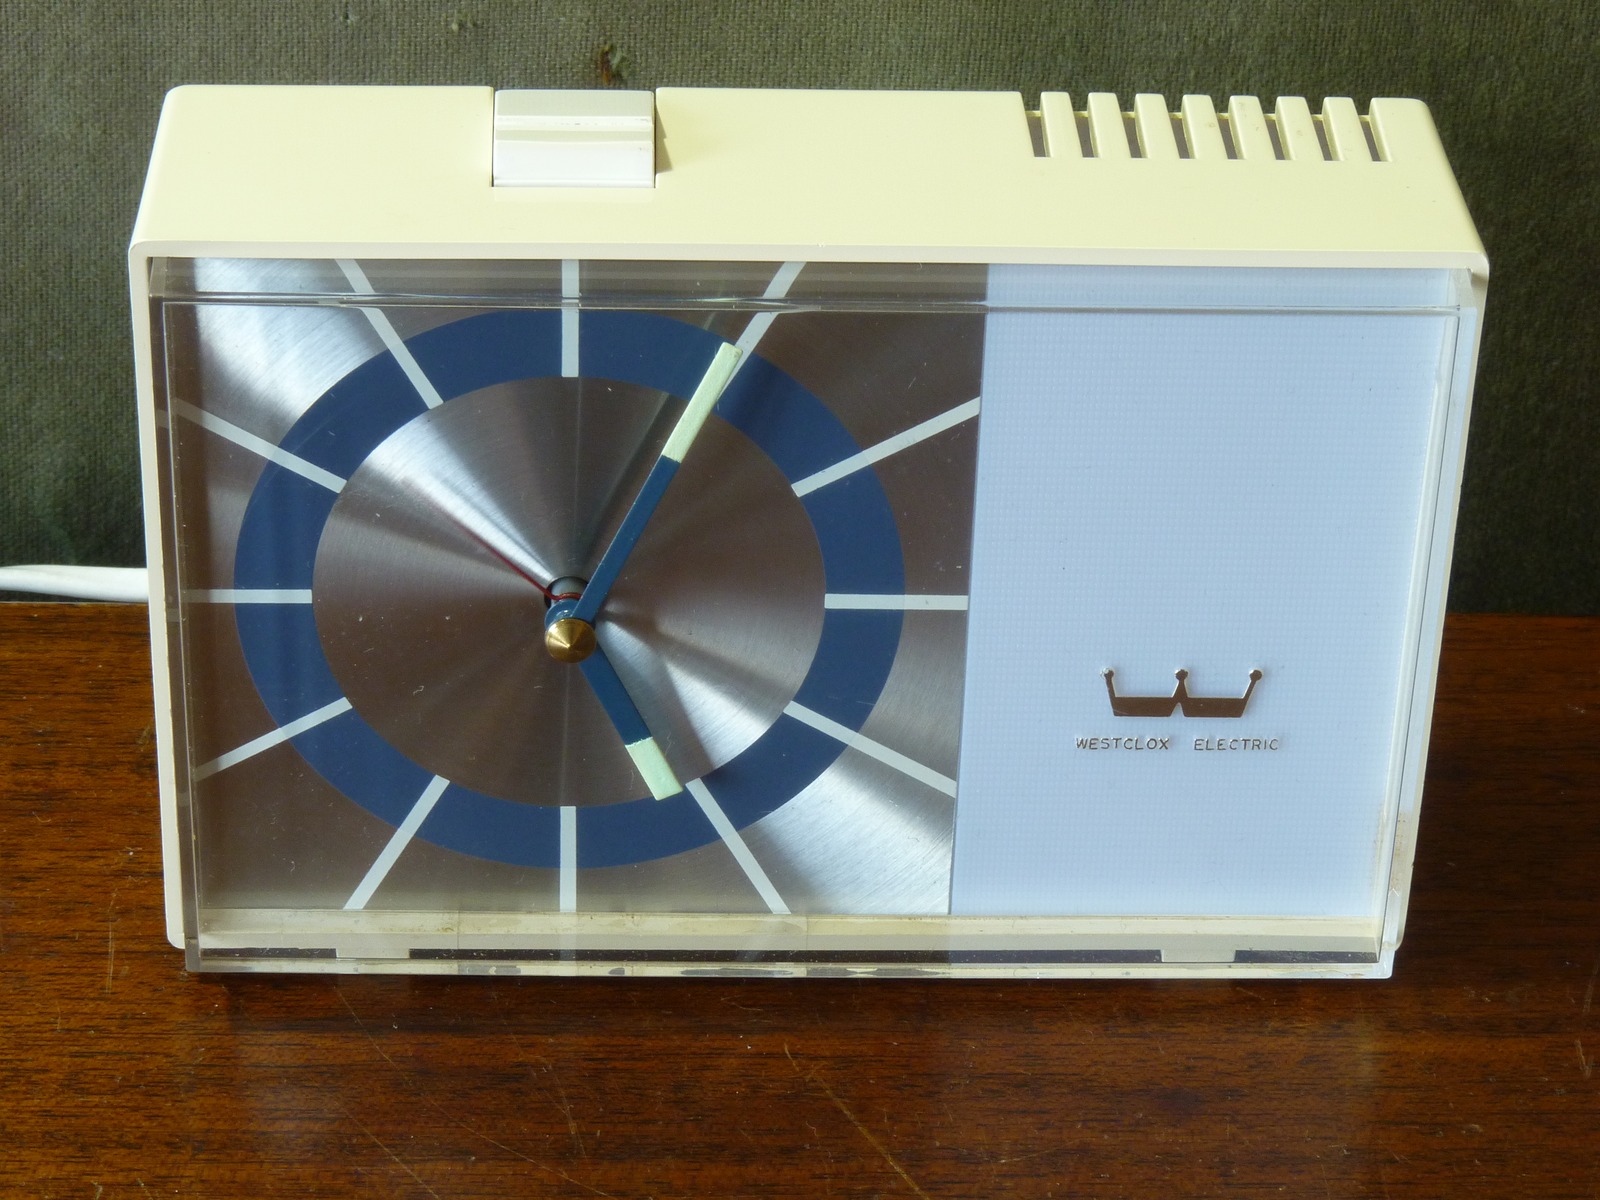 Vintage Westclox Electric Alarm Clock with Buzzer and Flashing Light ...